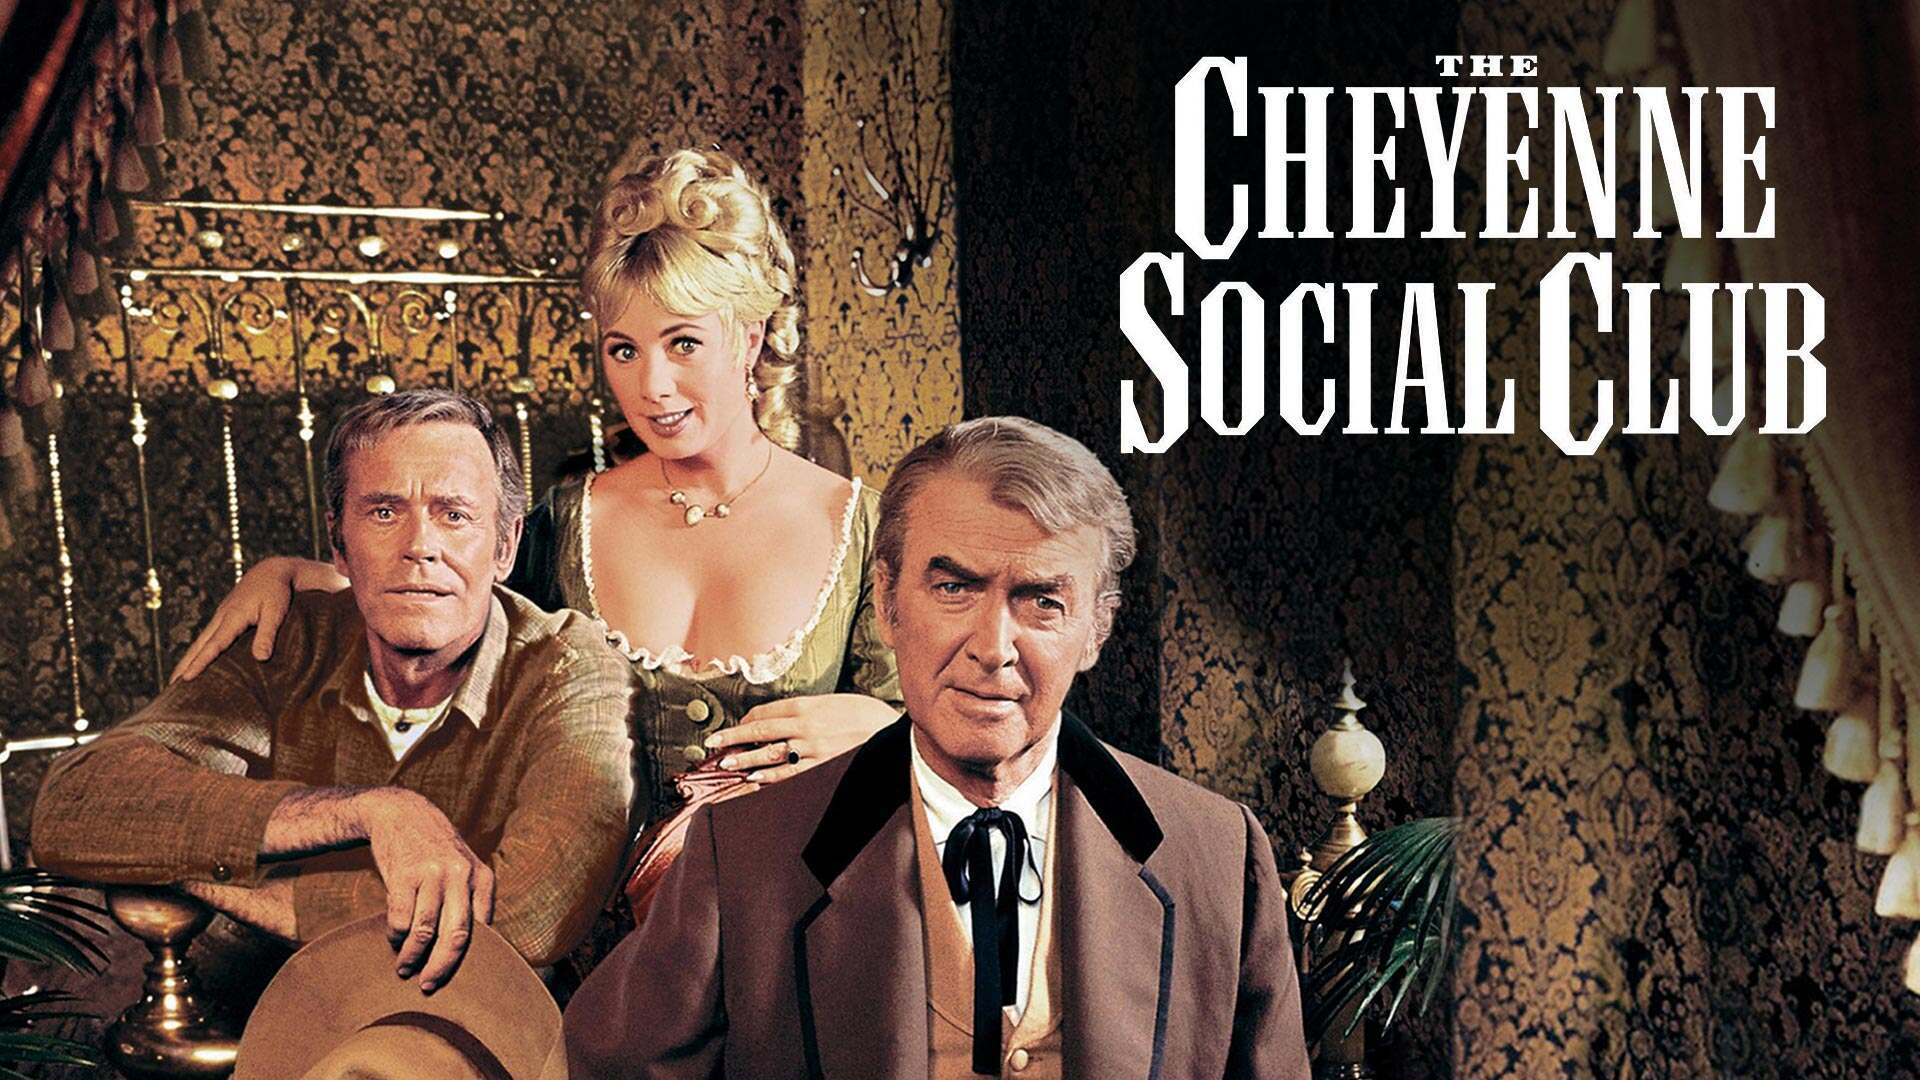 37-facts-about-the-movie-the-cheyenne-social-club